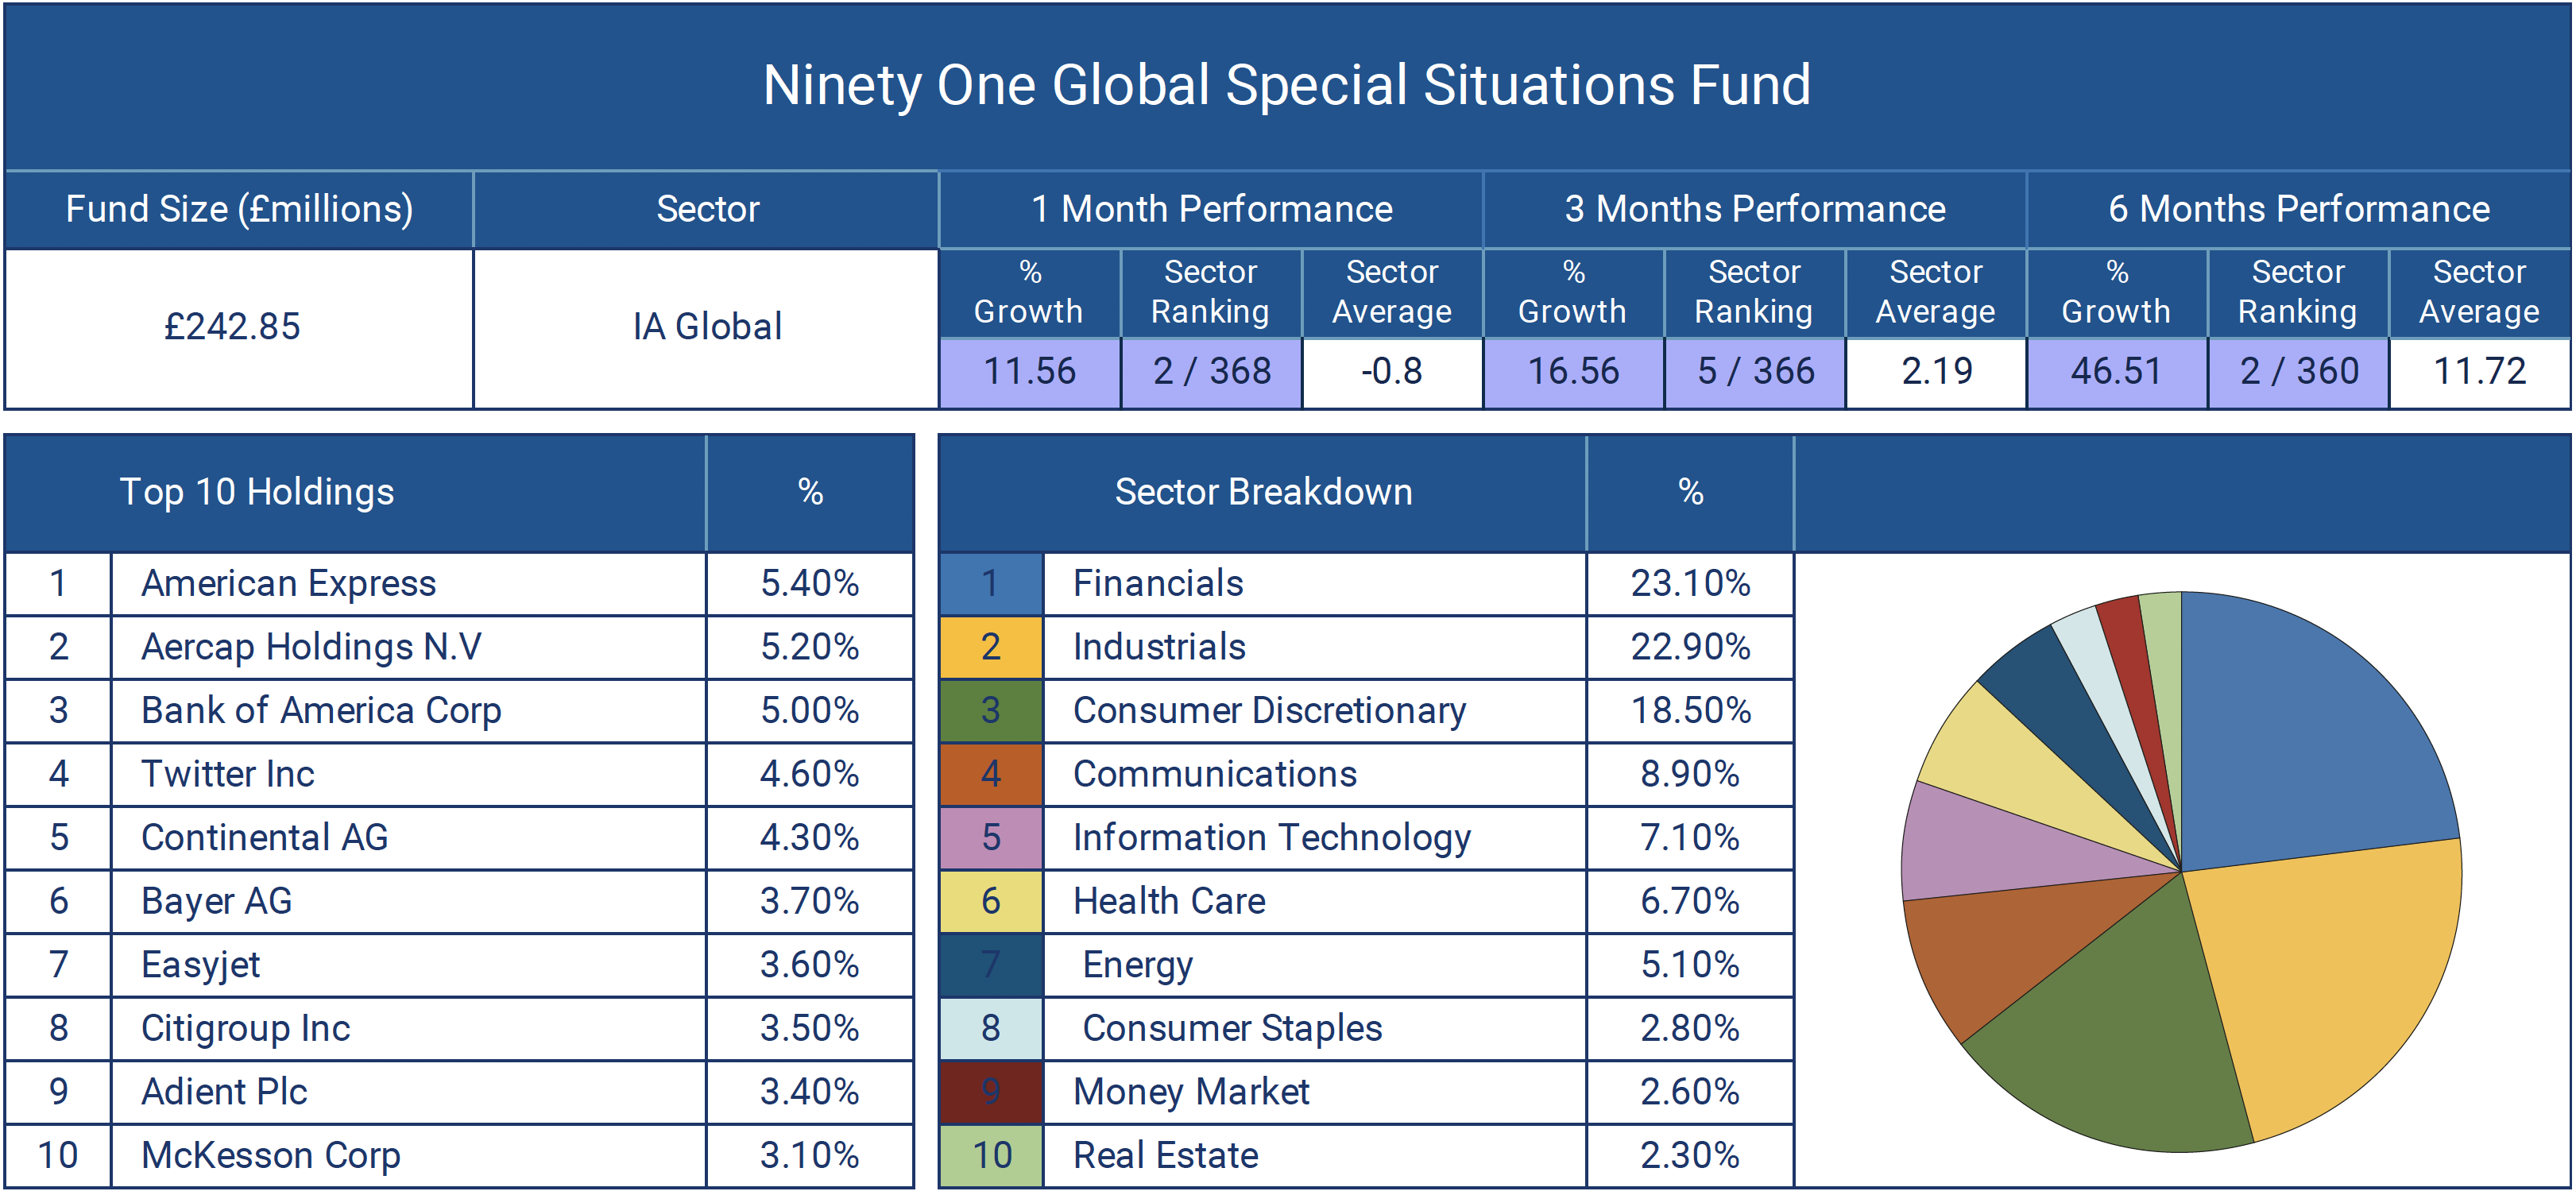 Ninety One Global Special Situations Fund